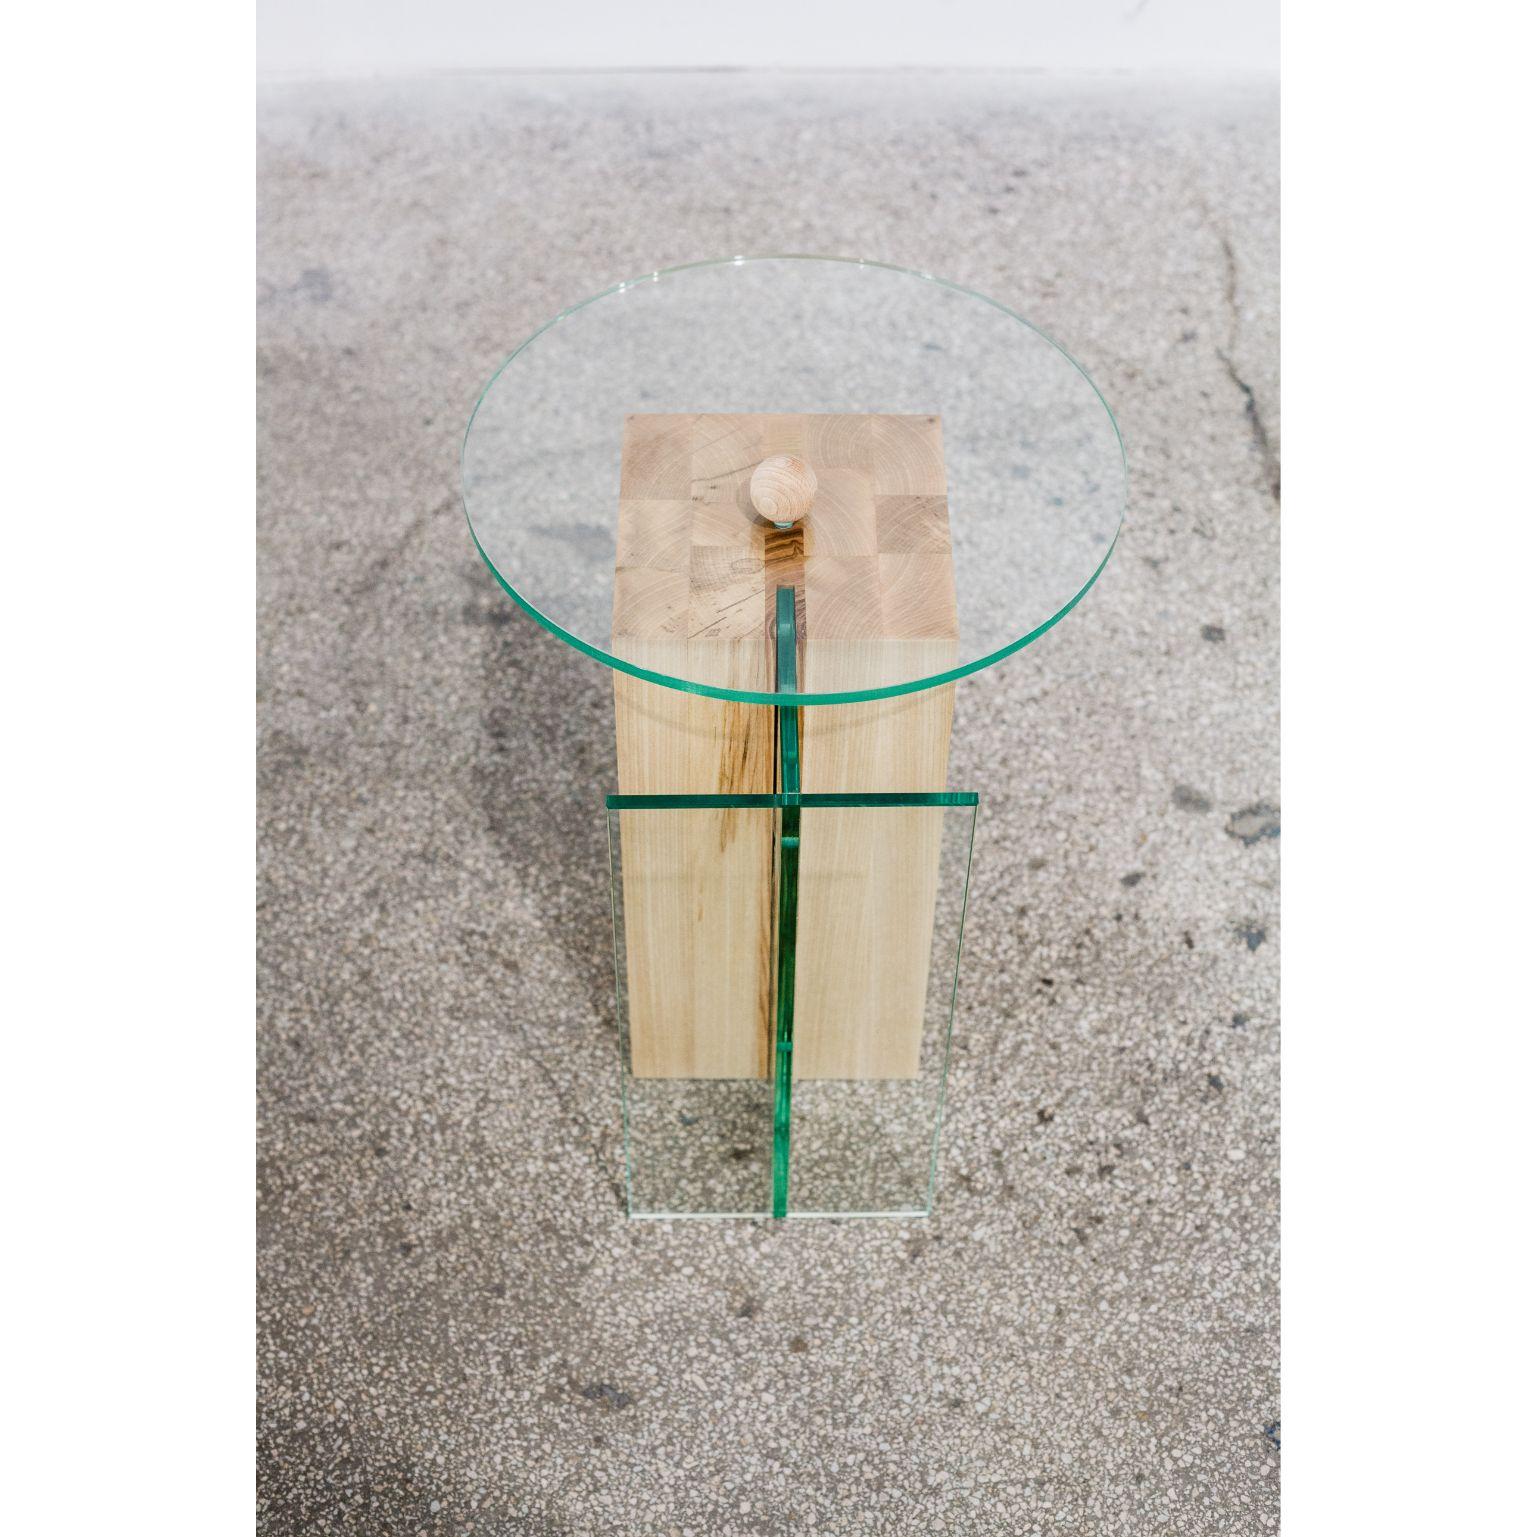 Form 4 by Radu Abraham
A limited series of 10, that is currently at nr.2
Materials: Ash wood, glass
Dimensions: Approx.50 x 70 cm

Massive rectangular shaped ash wood volume, with glass on the side and top.

Inspired by geometrical shapes and